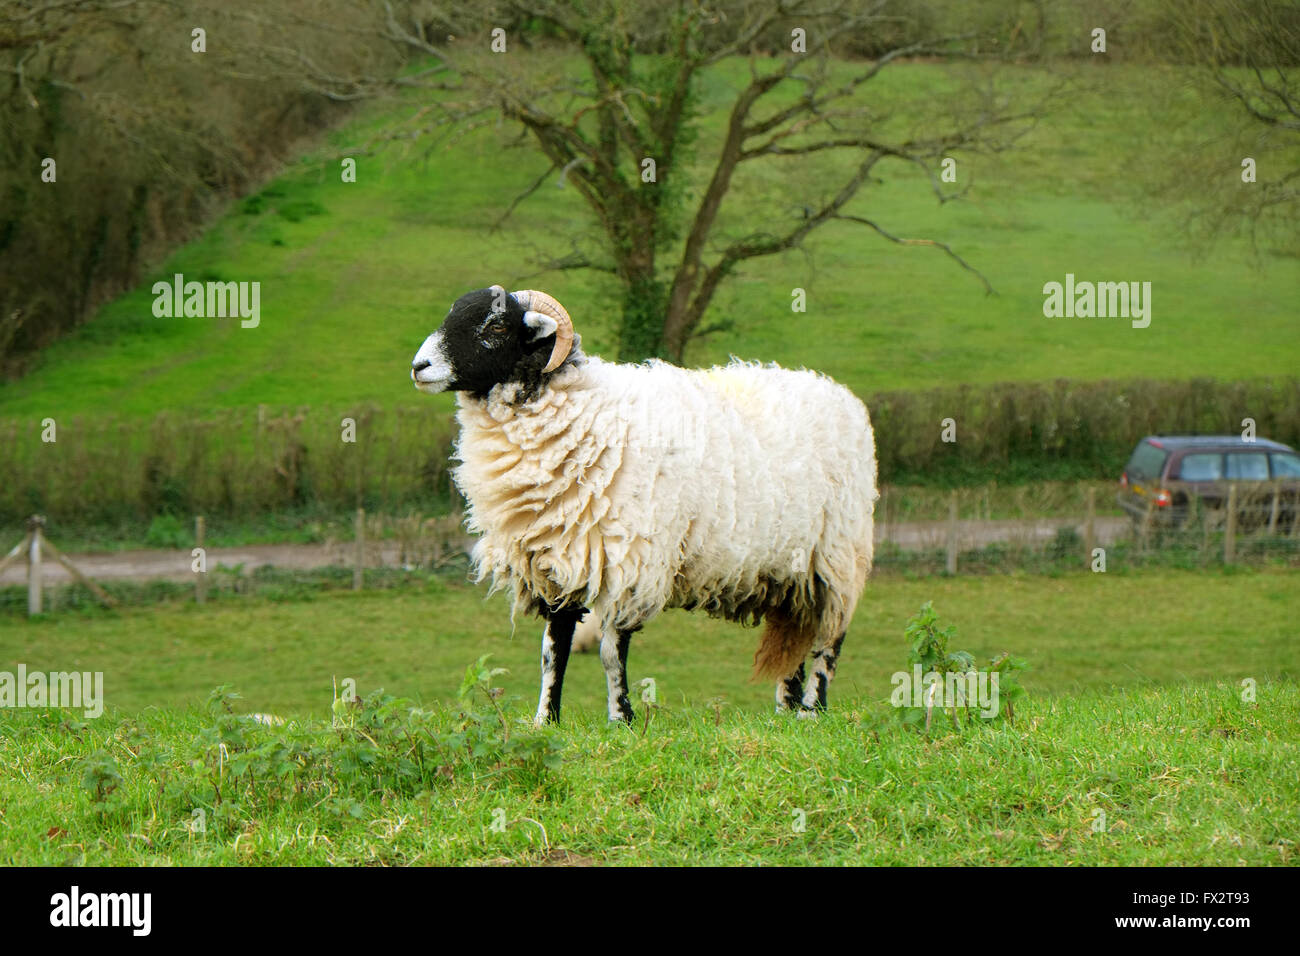 Horned male sheep on a grassy bank in rural Somerset, 9th April 2016 Stock Photo